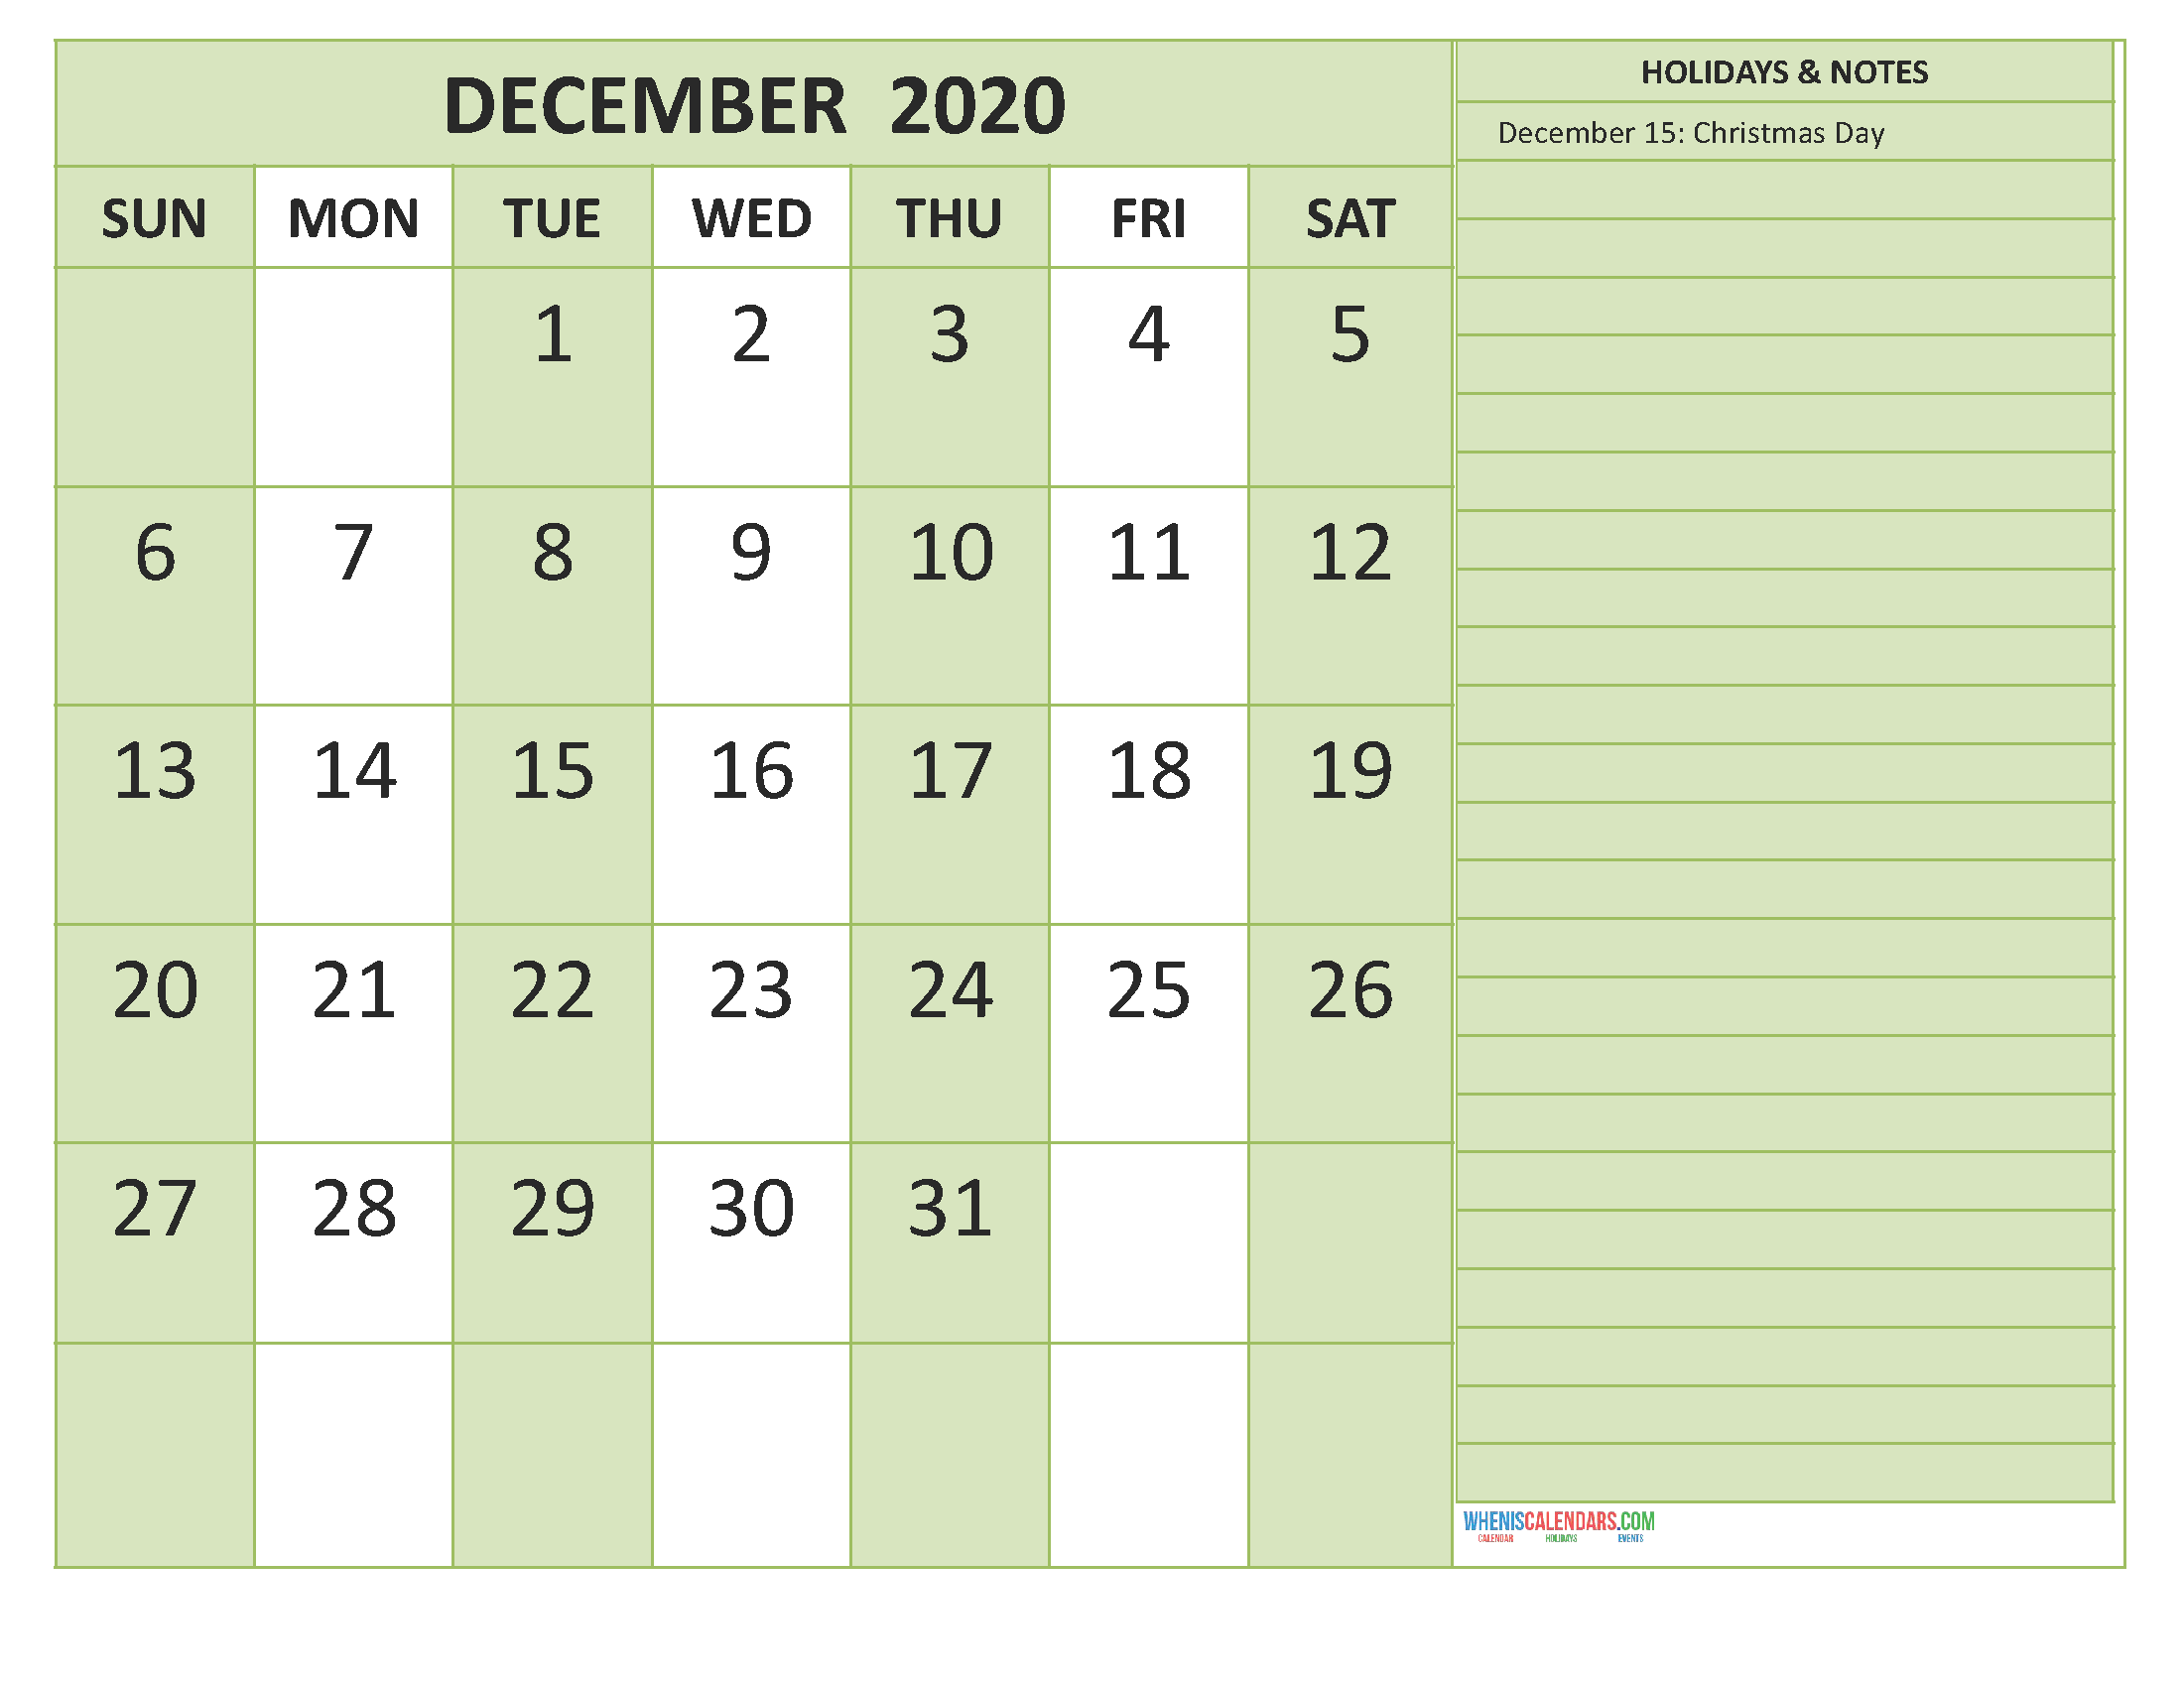 Free Printable Monthly Calendar 2020 December with Holidays